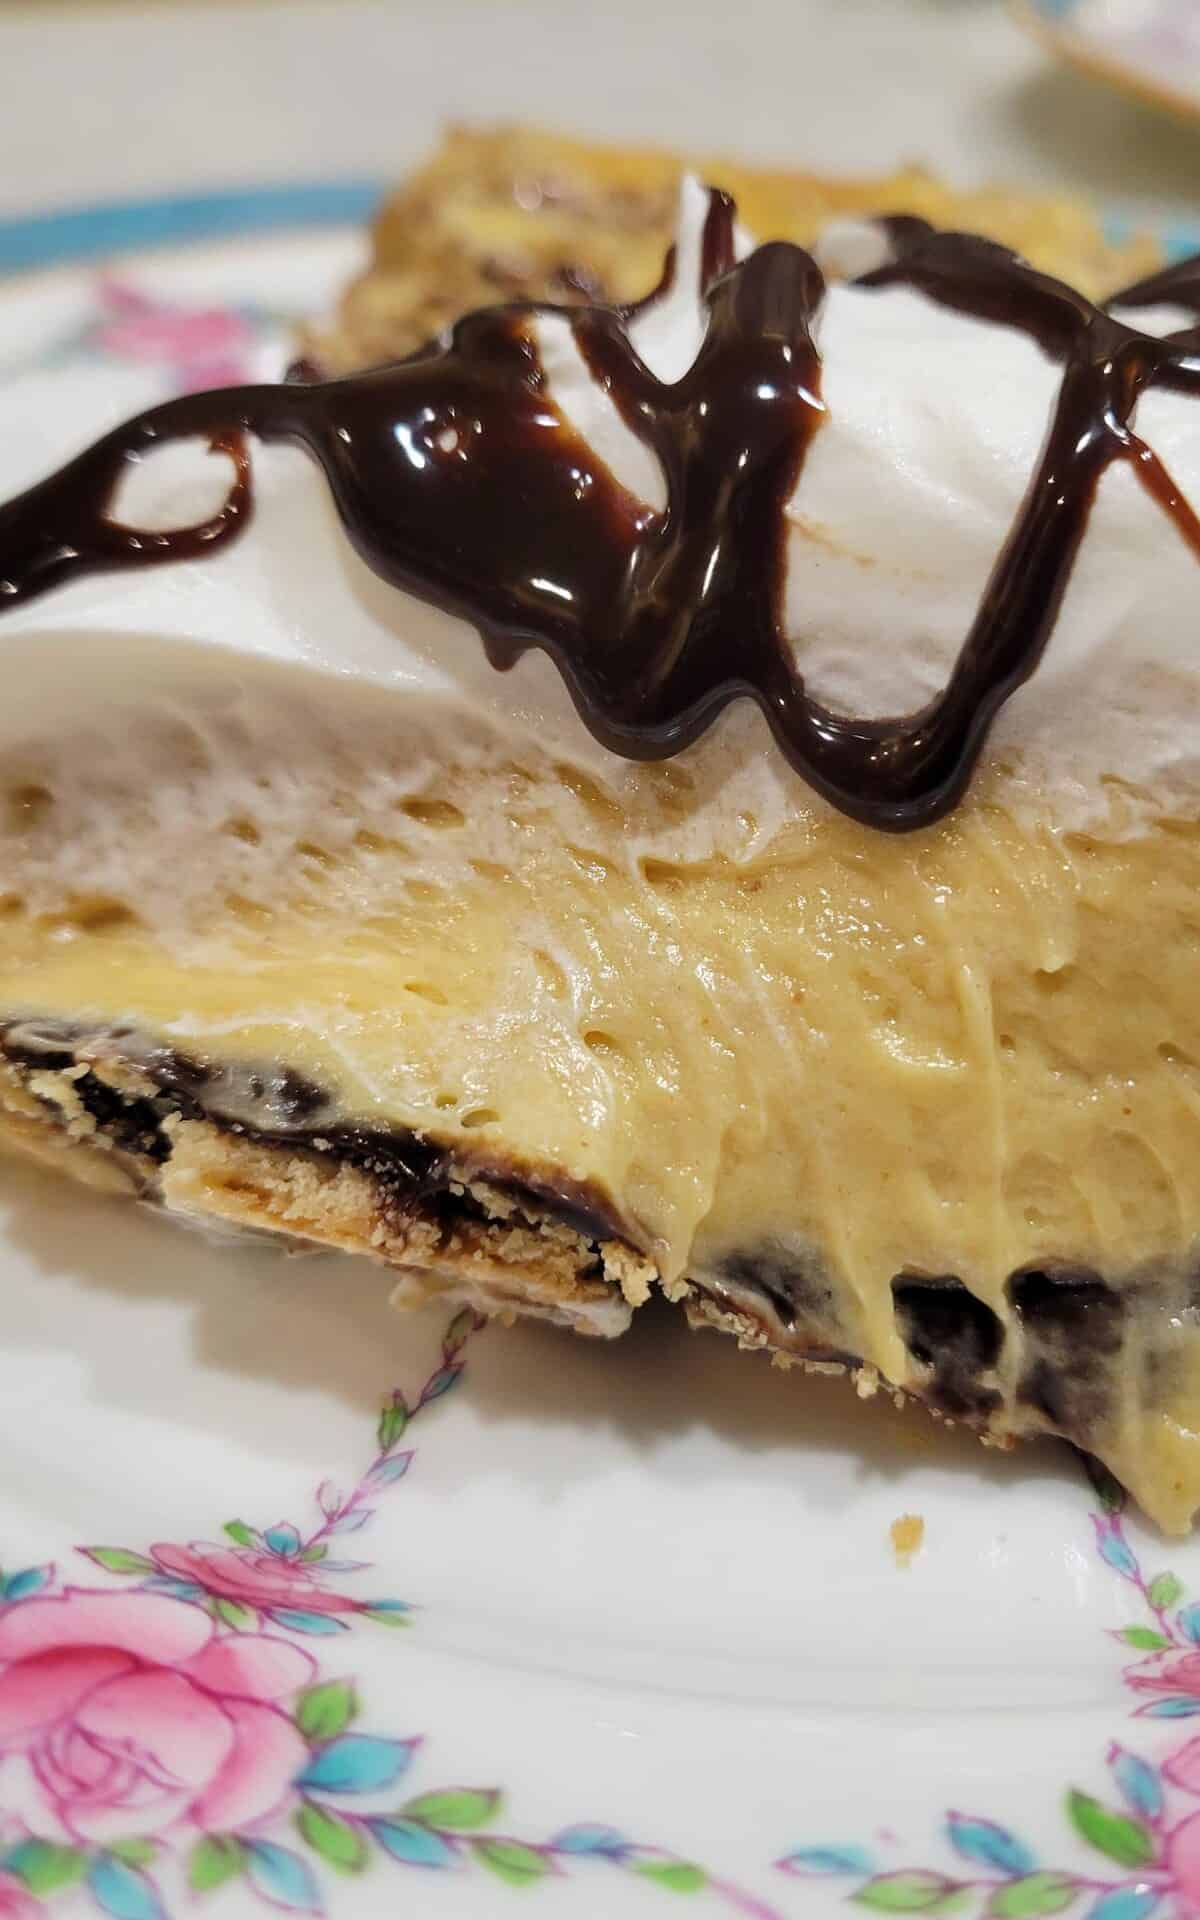  The classic combination of peanut butter and chocolate in a pie form.